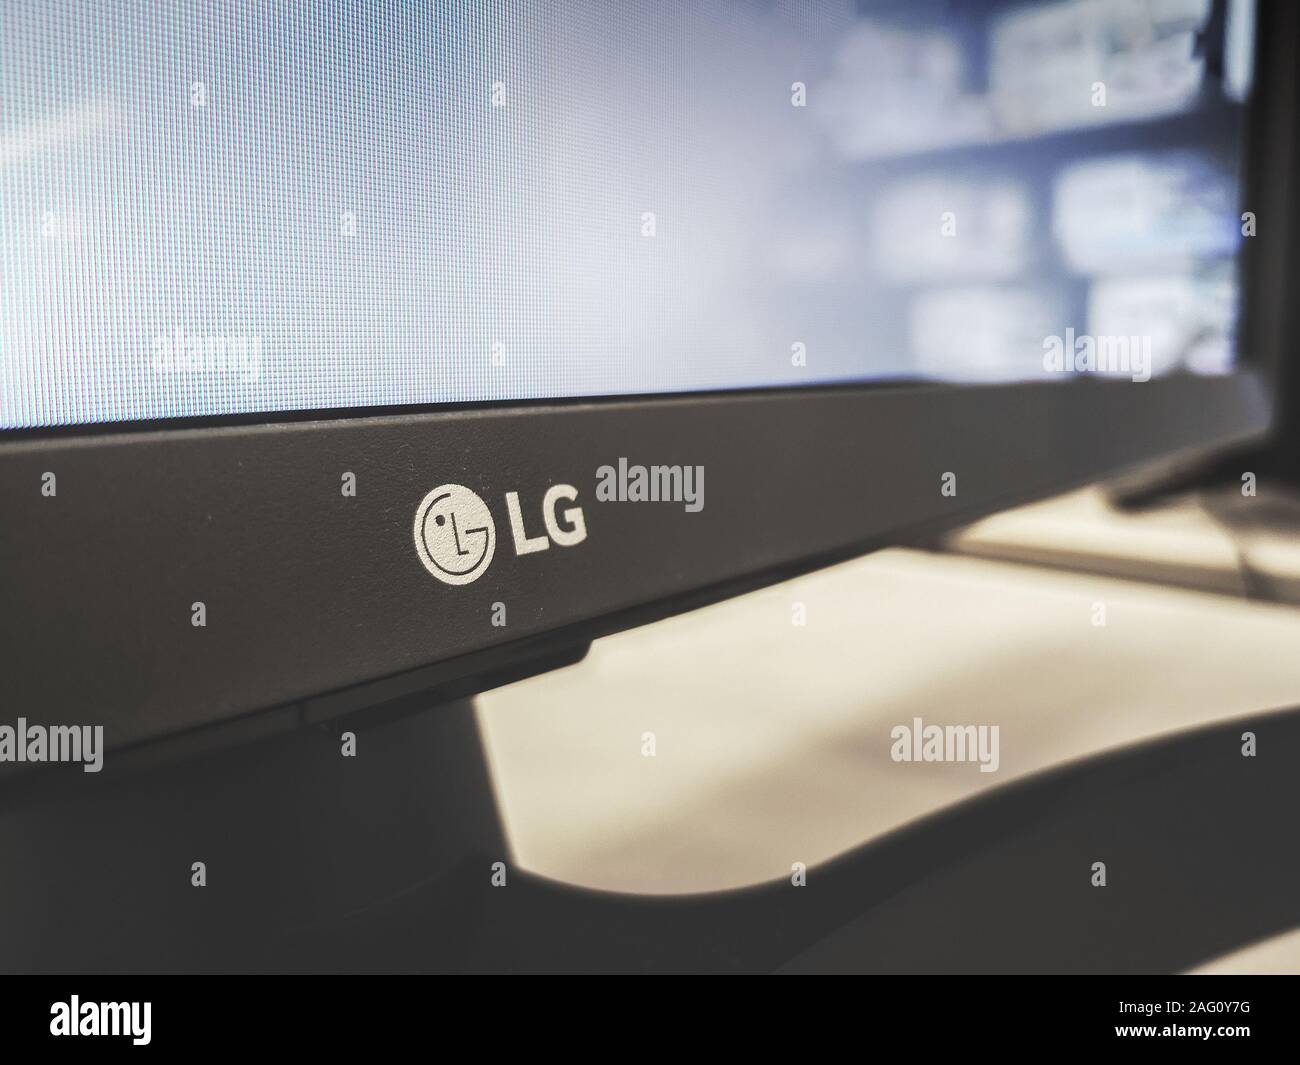 LG brand logo and symbol on a computer monitor Stock Photo